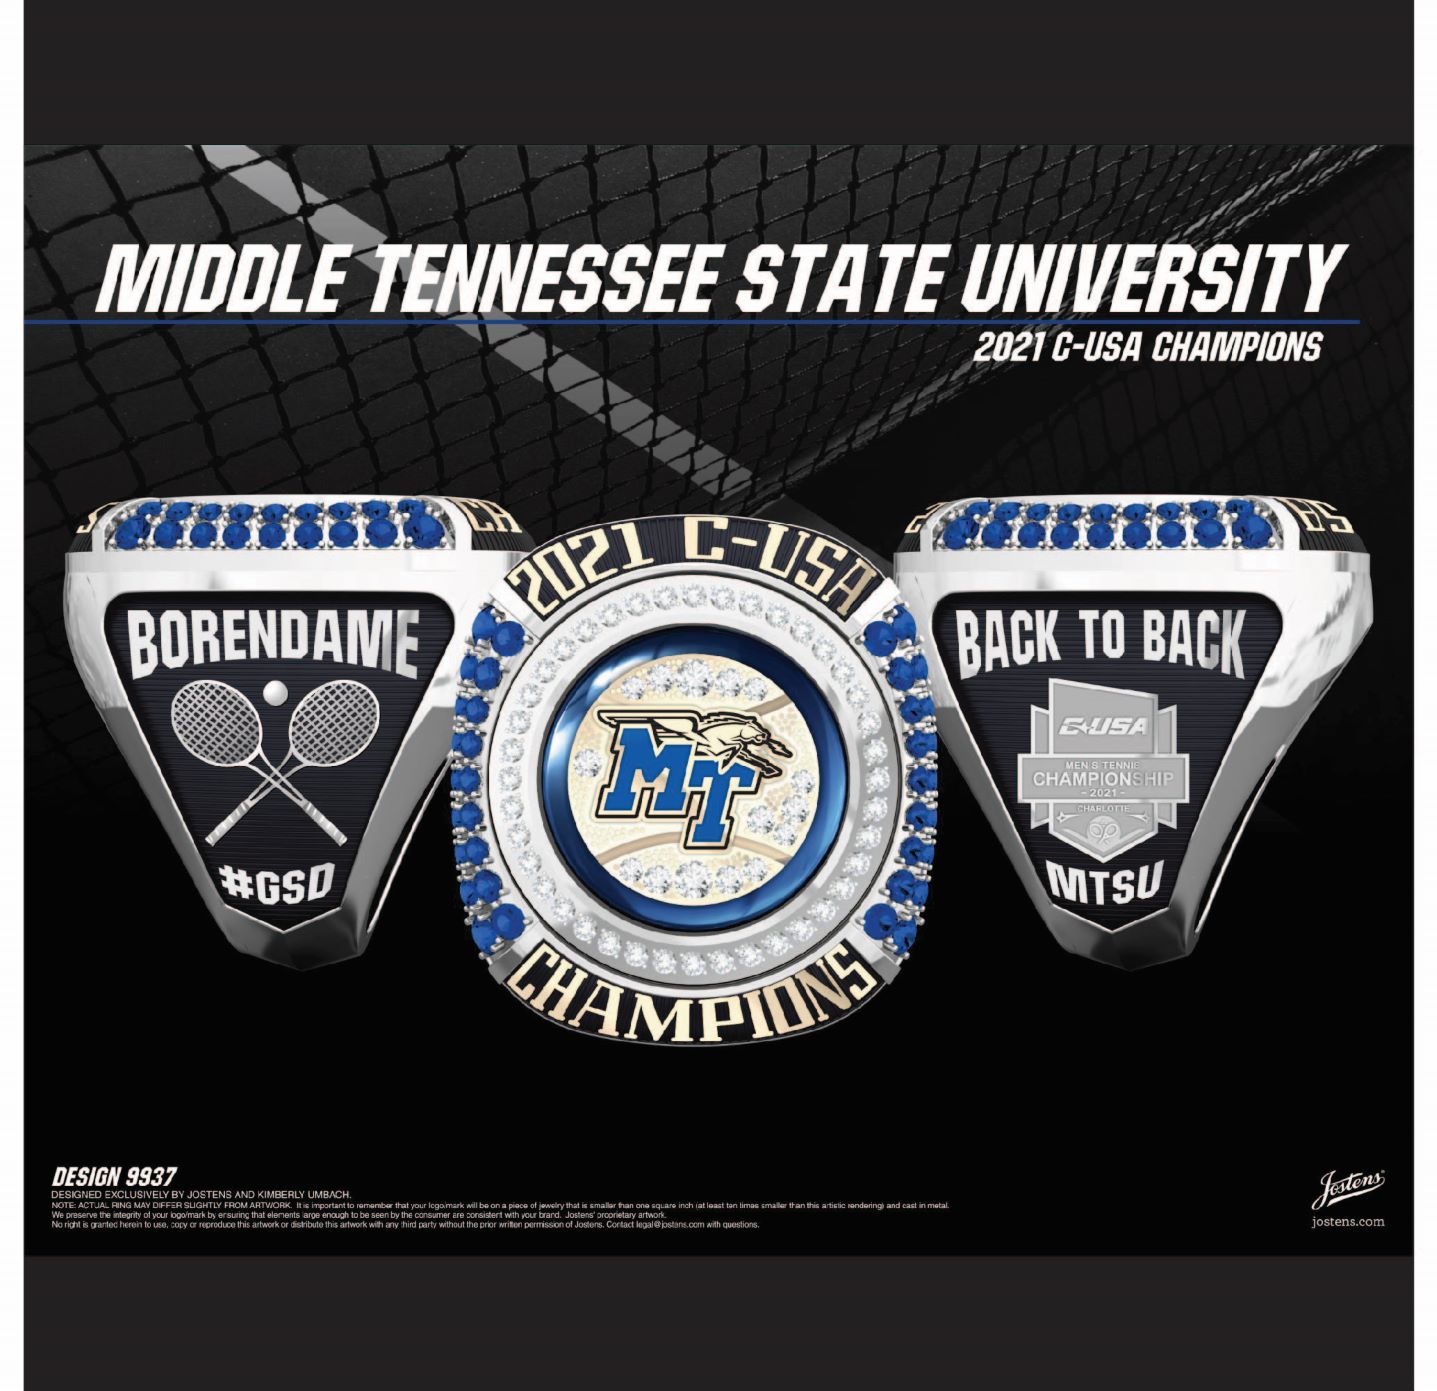 Middle Tennessee State University Men's Tennis 2021 C-USA Championship Ring